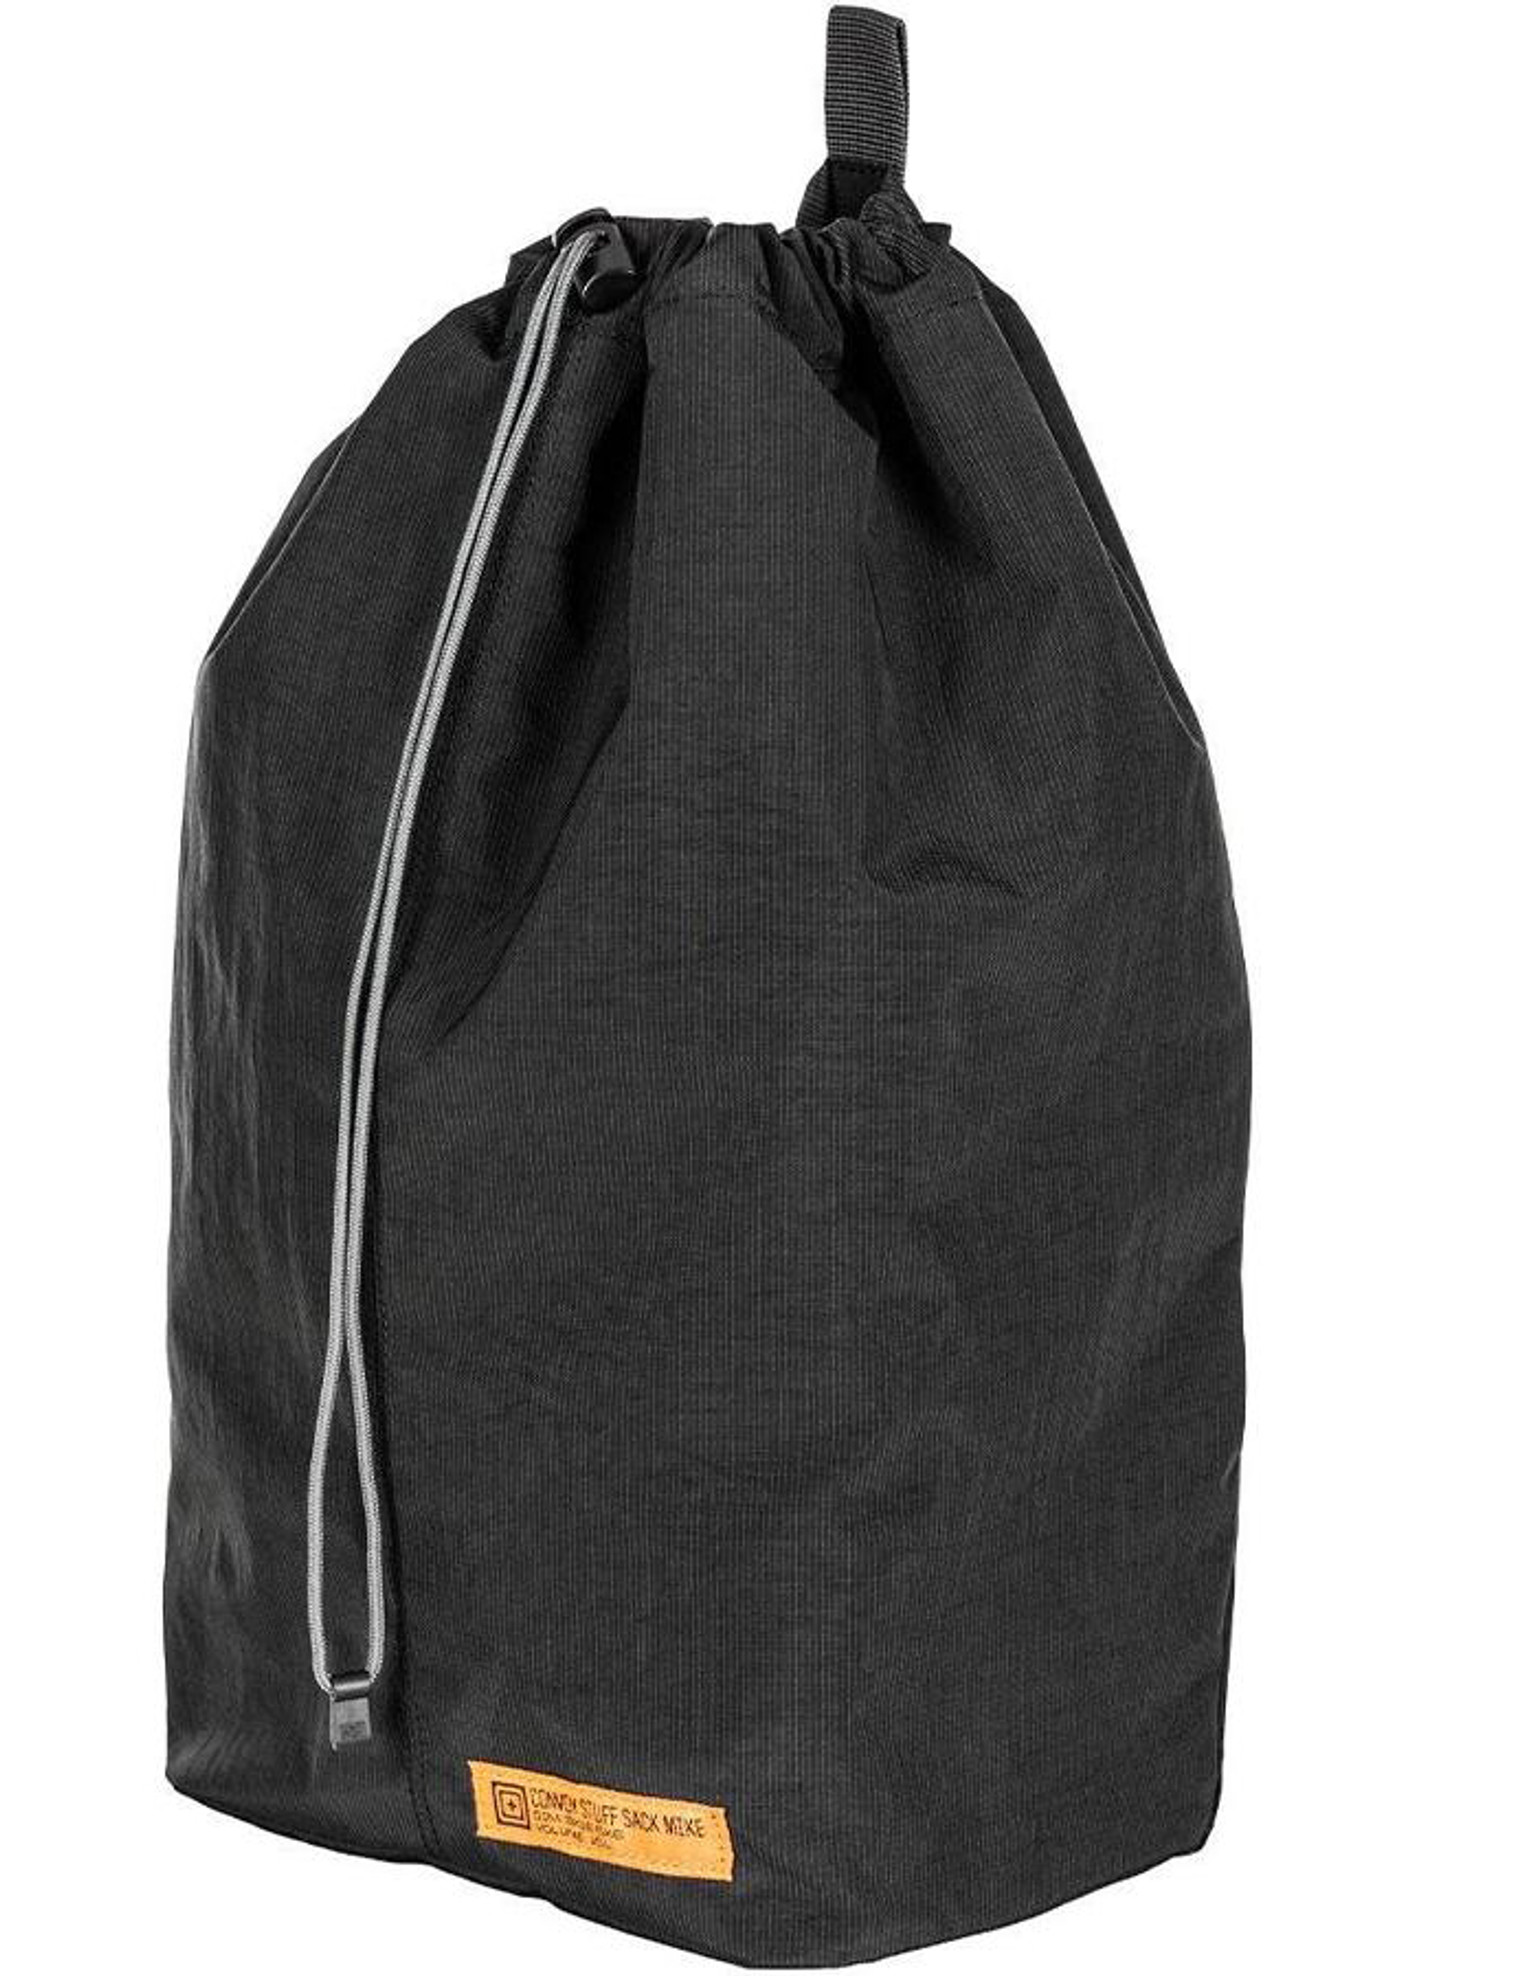 5.11 Tactical Convoy Stuff Sack Mike